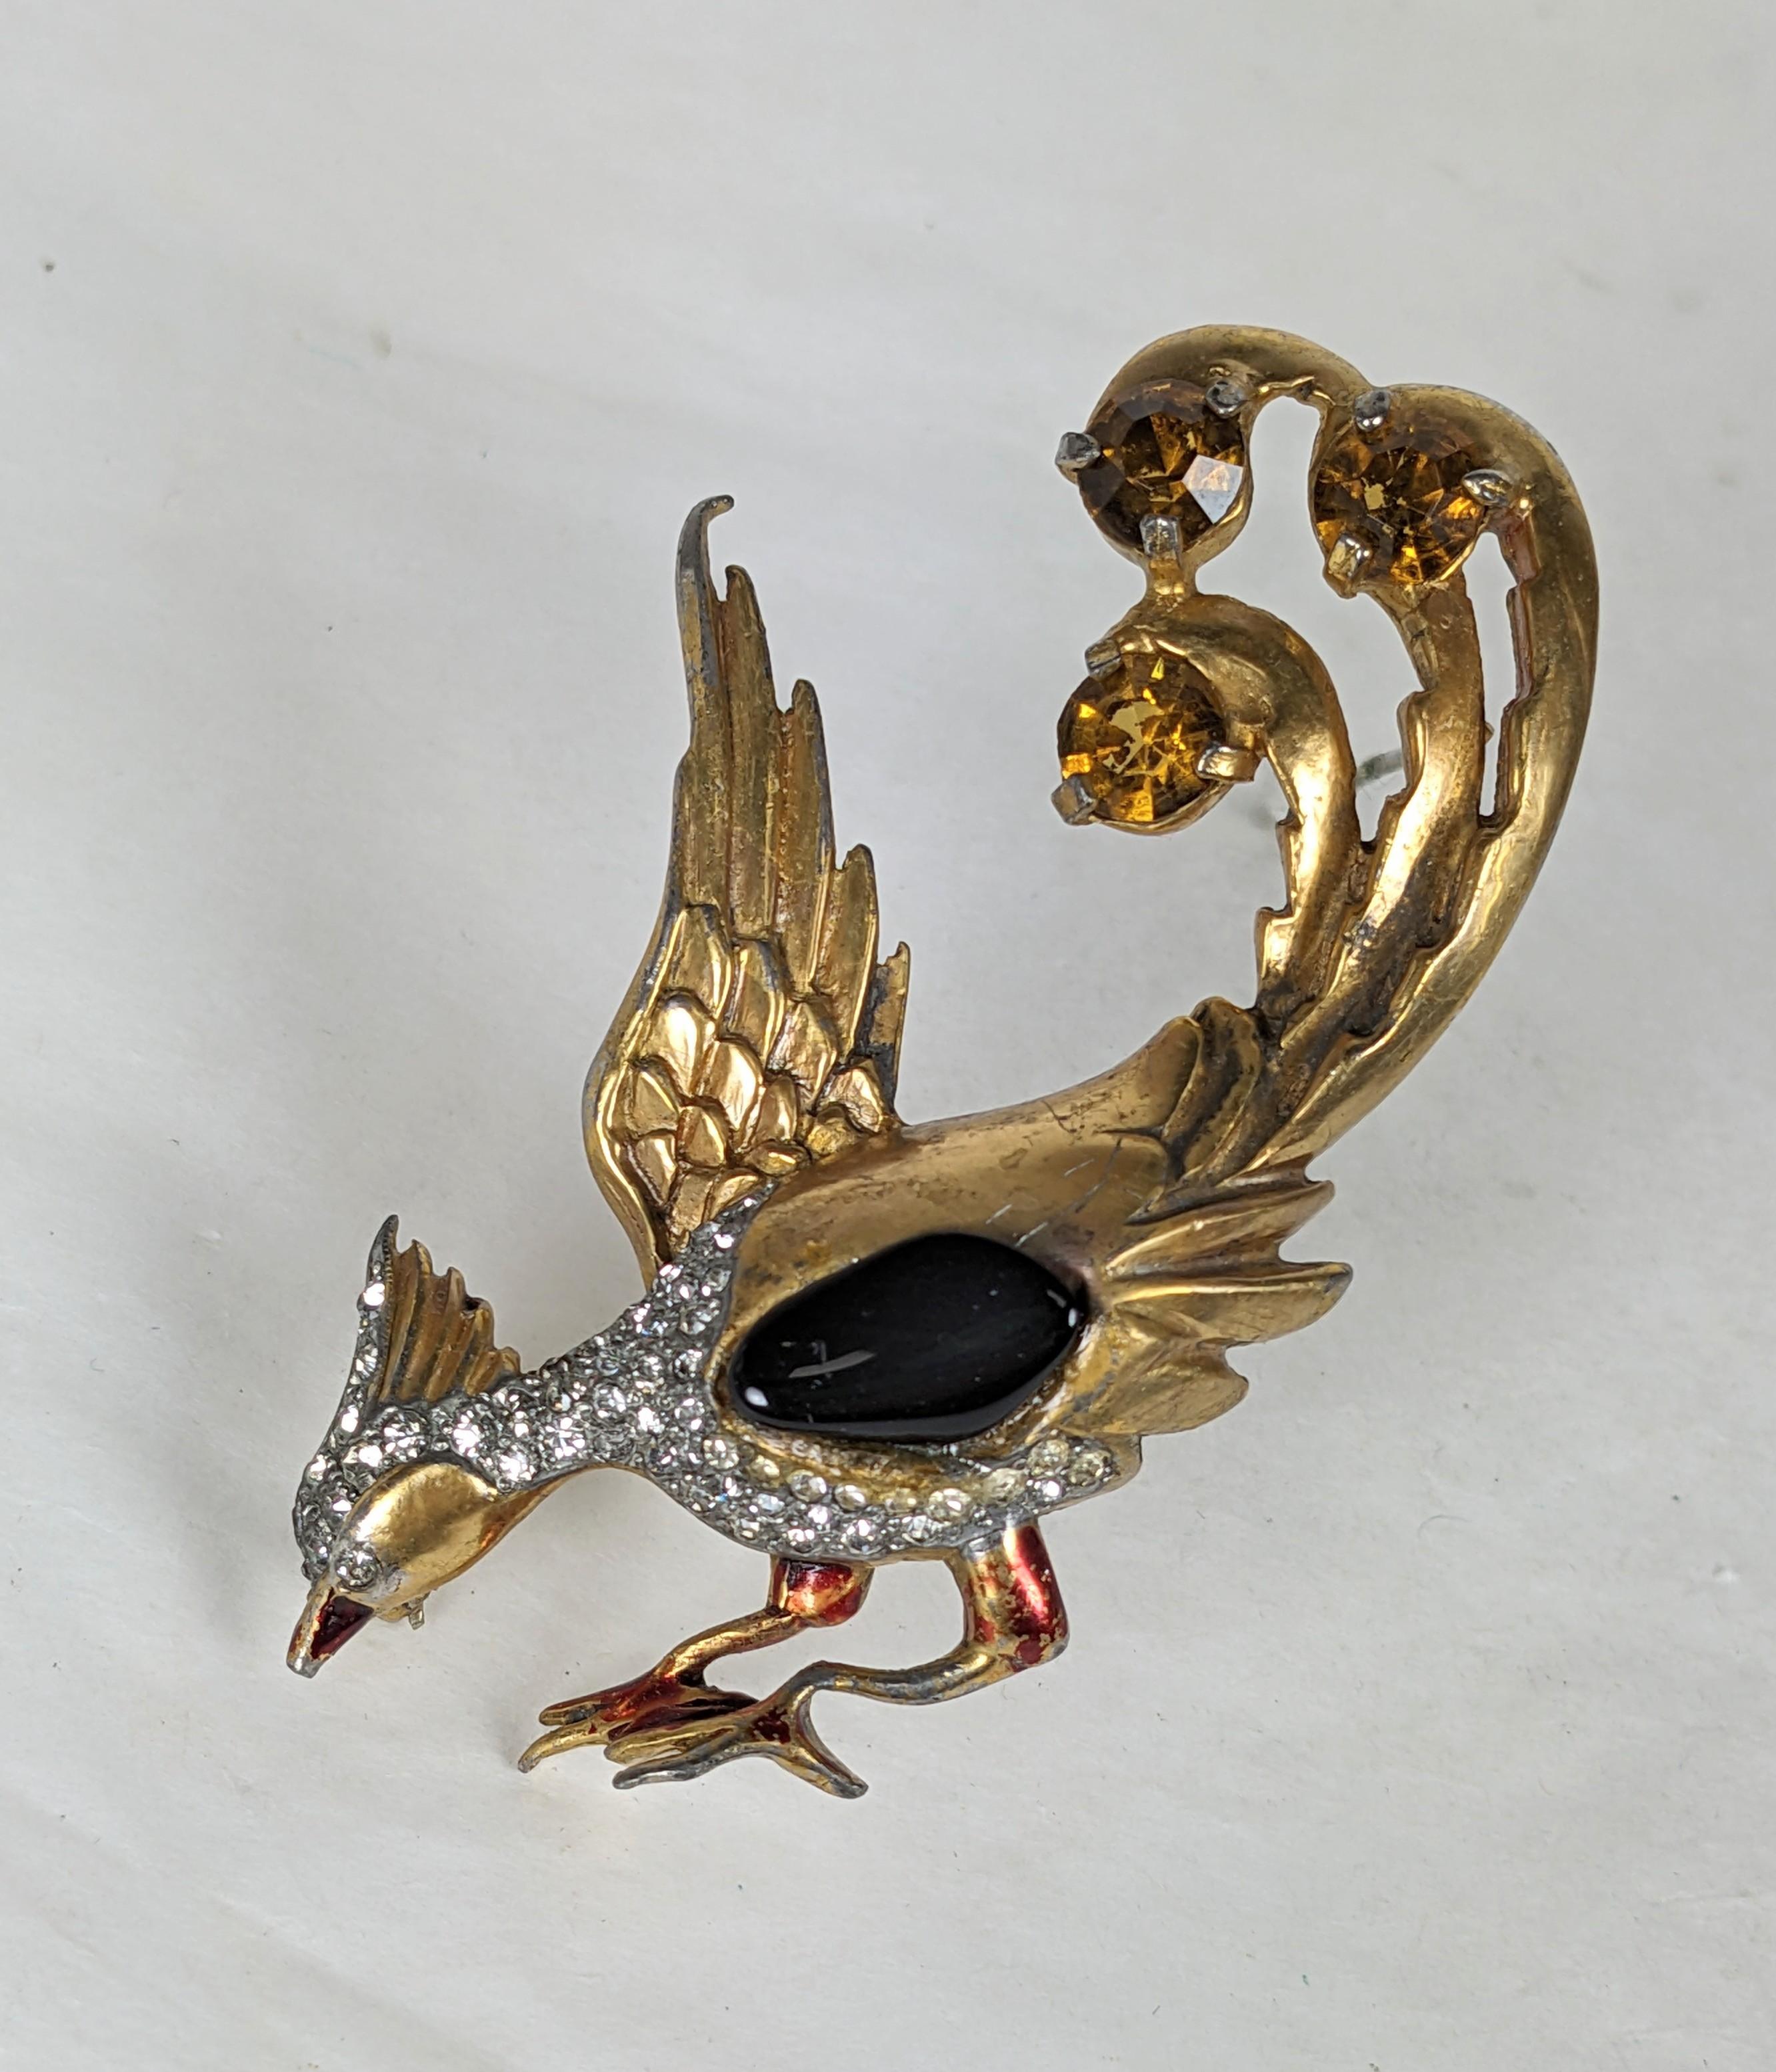 Charming, animated Art Deco Peacock Brooch from the 1930's. Gilt metal with pave accents, citrine crystals and a jet 